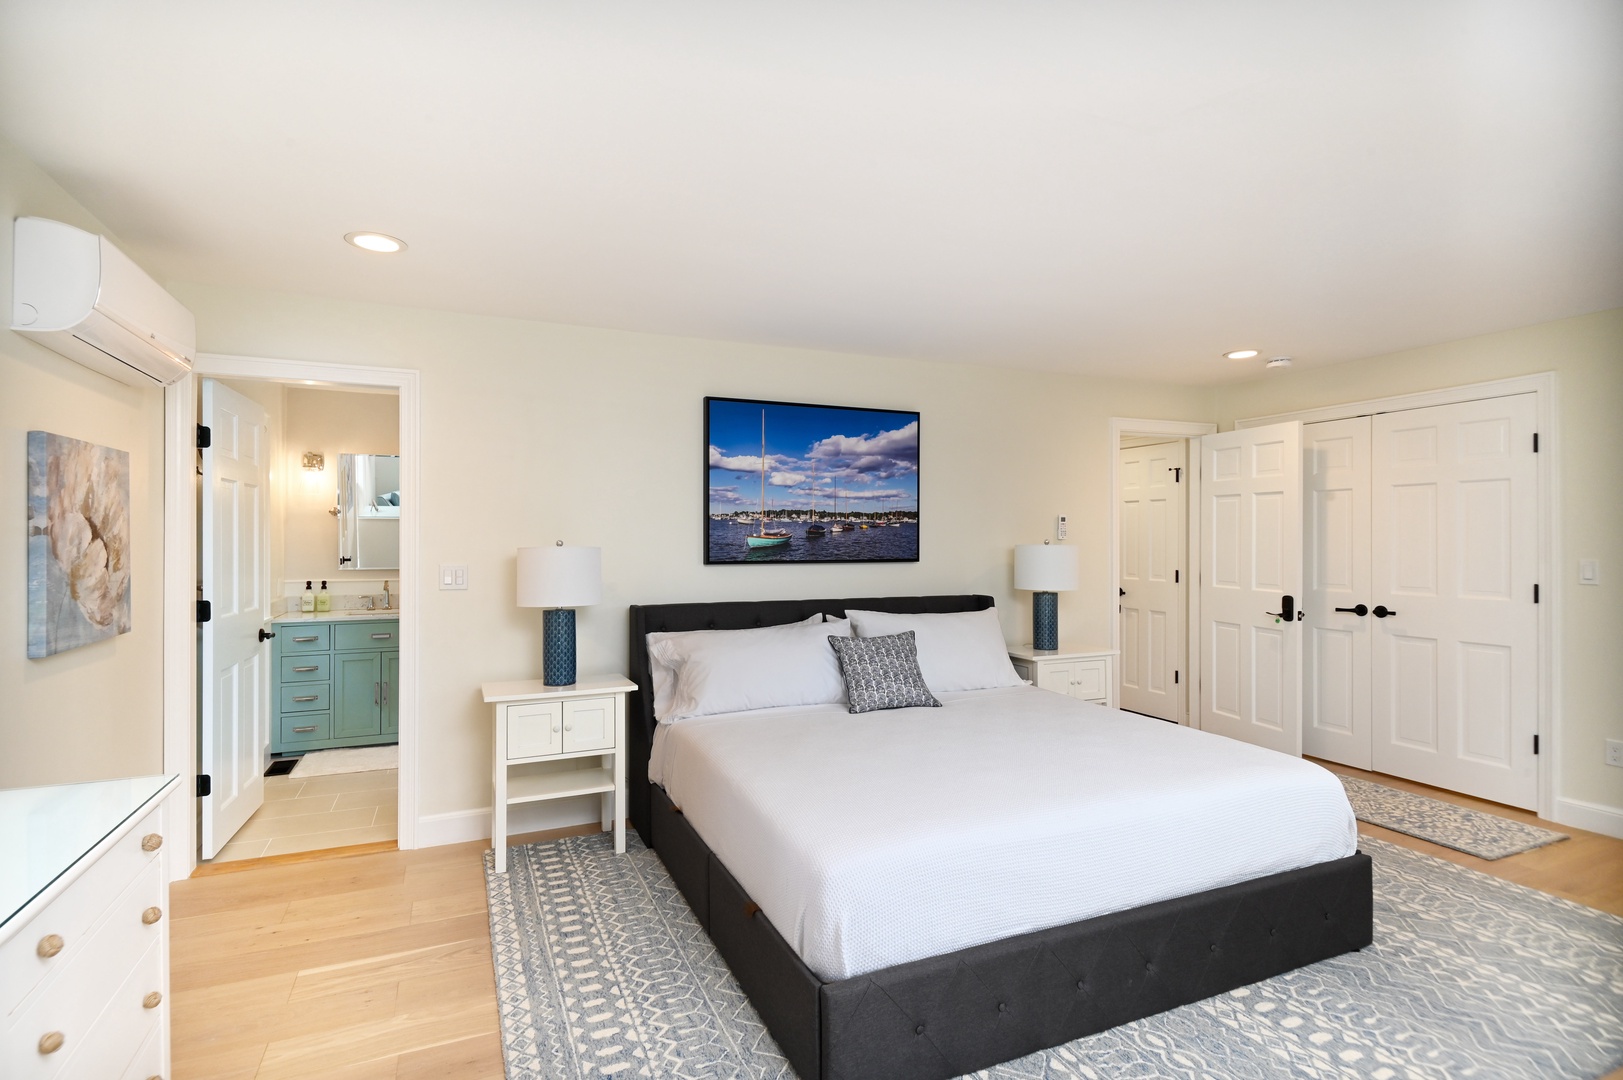 This breezy private studio boasts a plush king bed, ensuite, TV, & cozy kitchenette